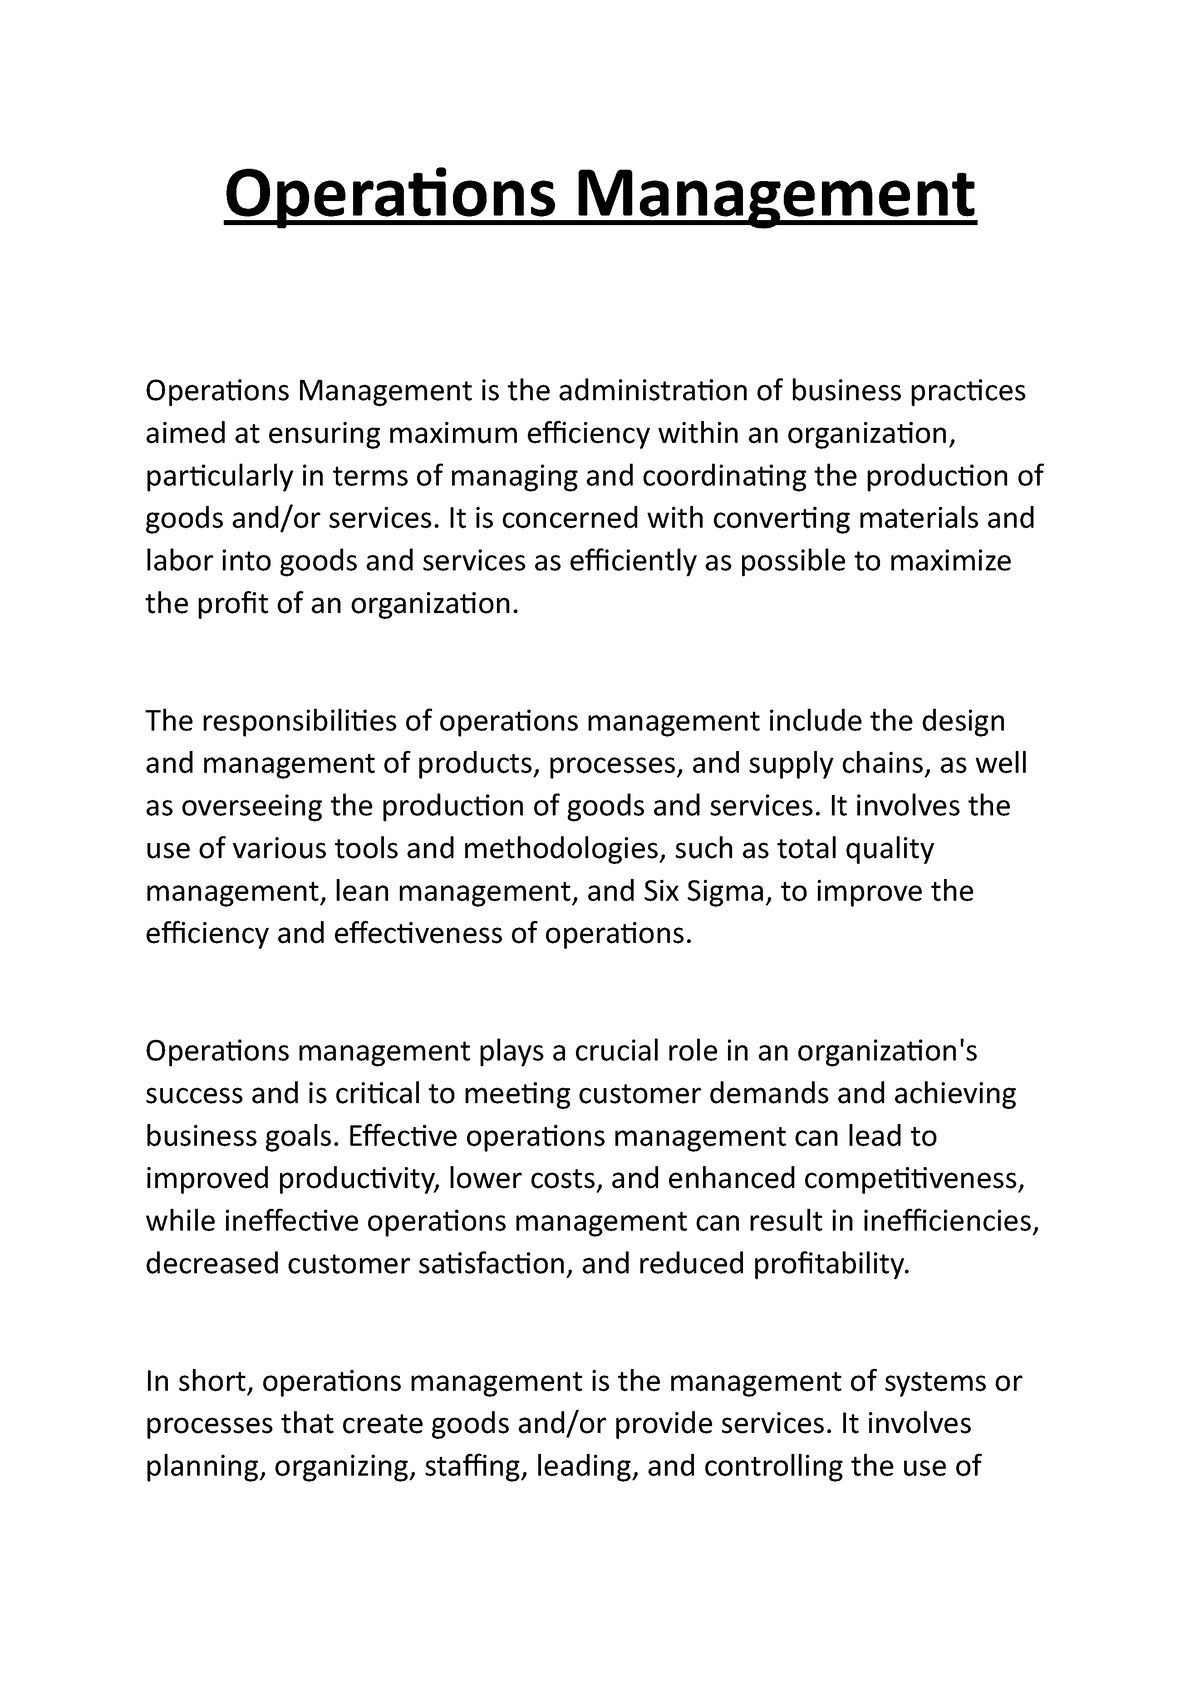 thesis title about operations management